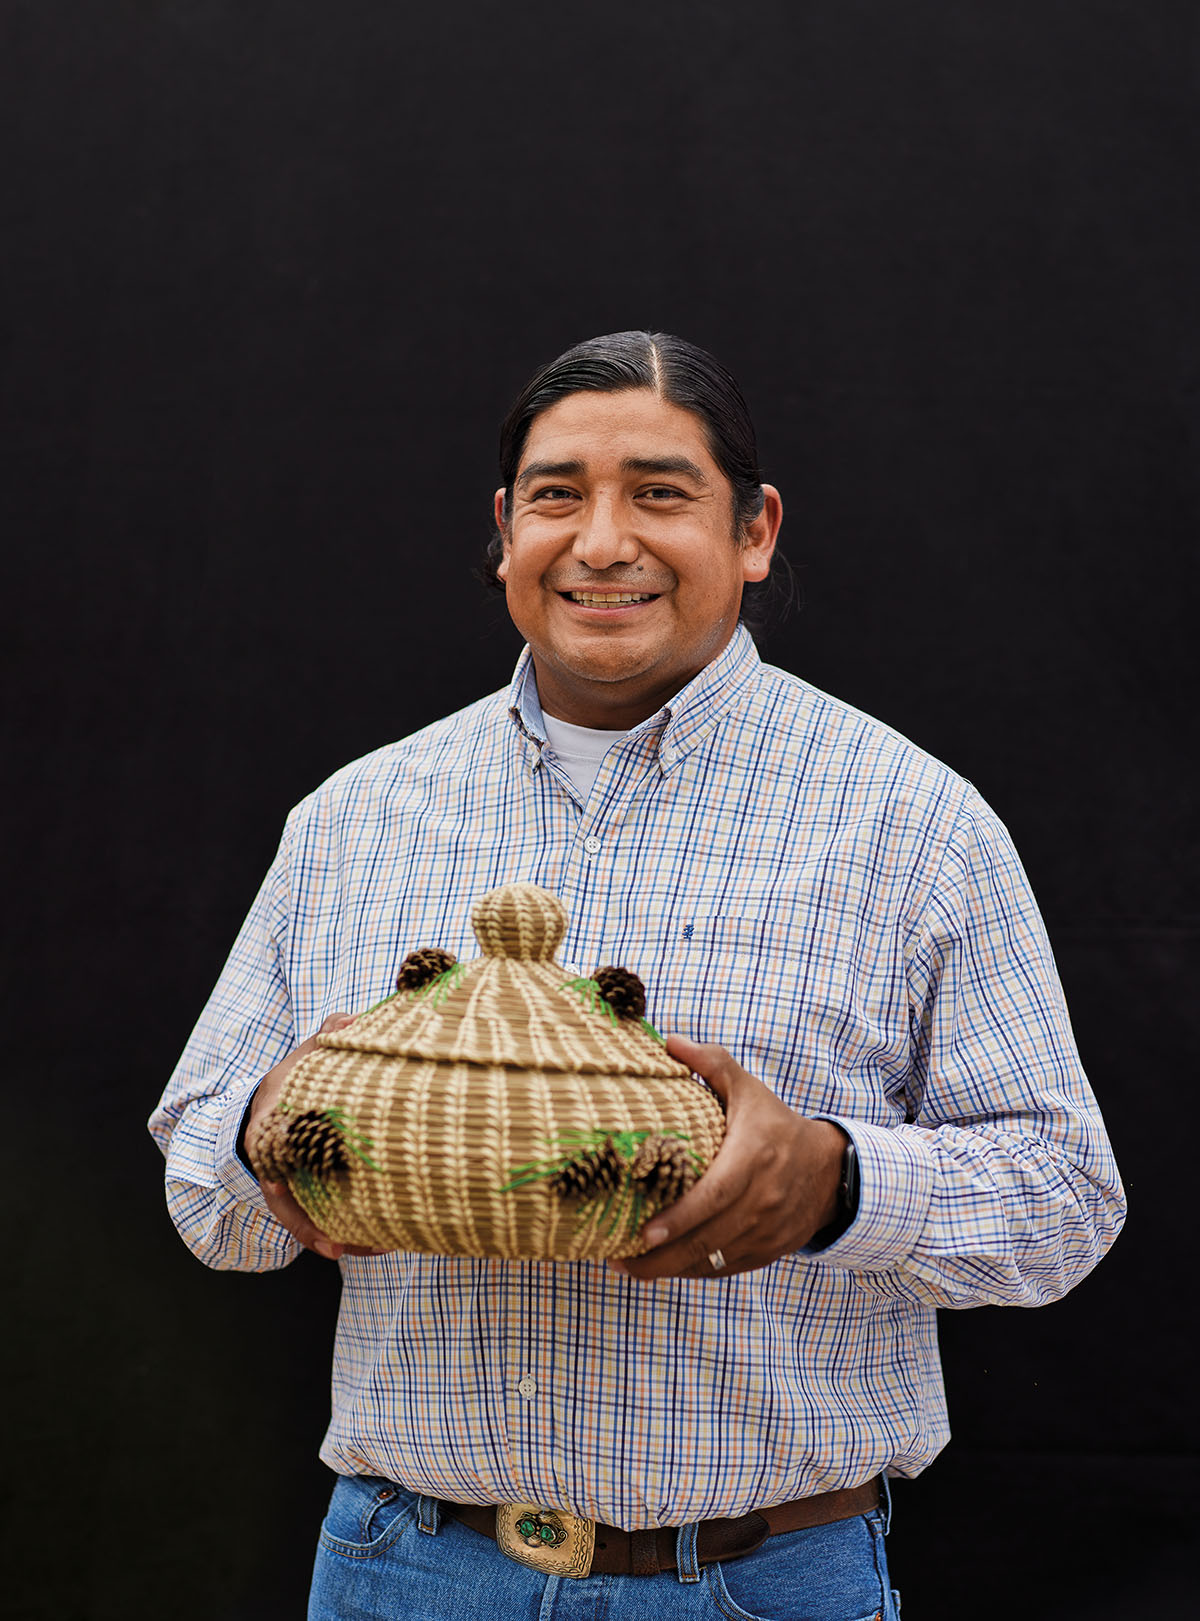 A man in a collared shirt holds a small woven basket in front of a dark background